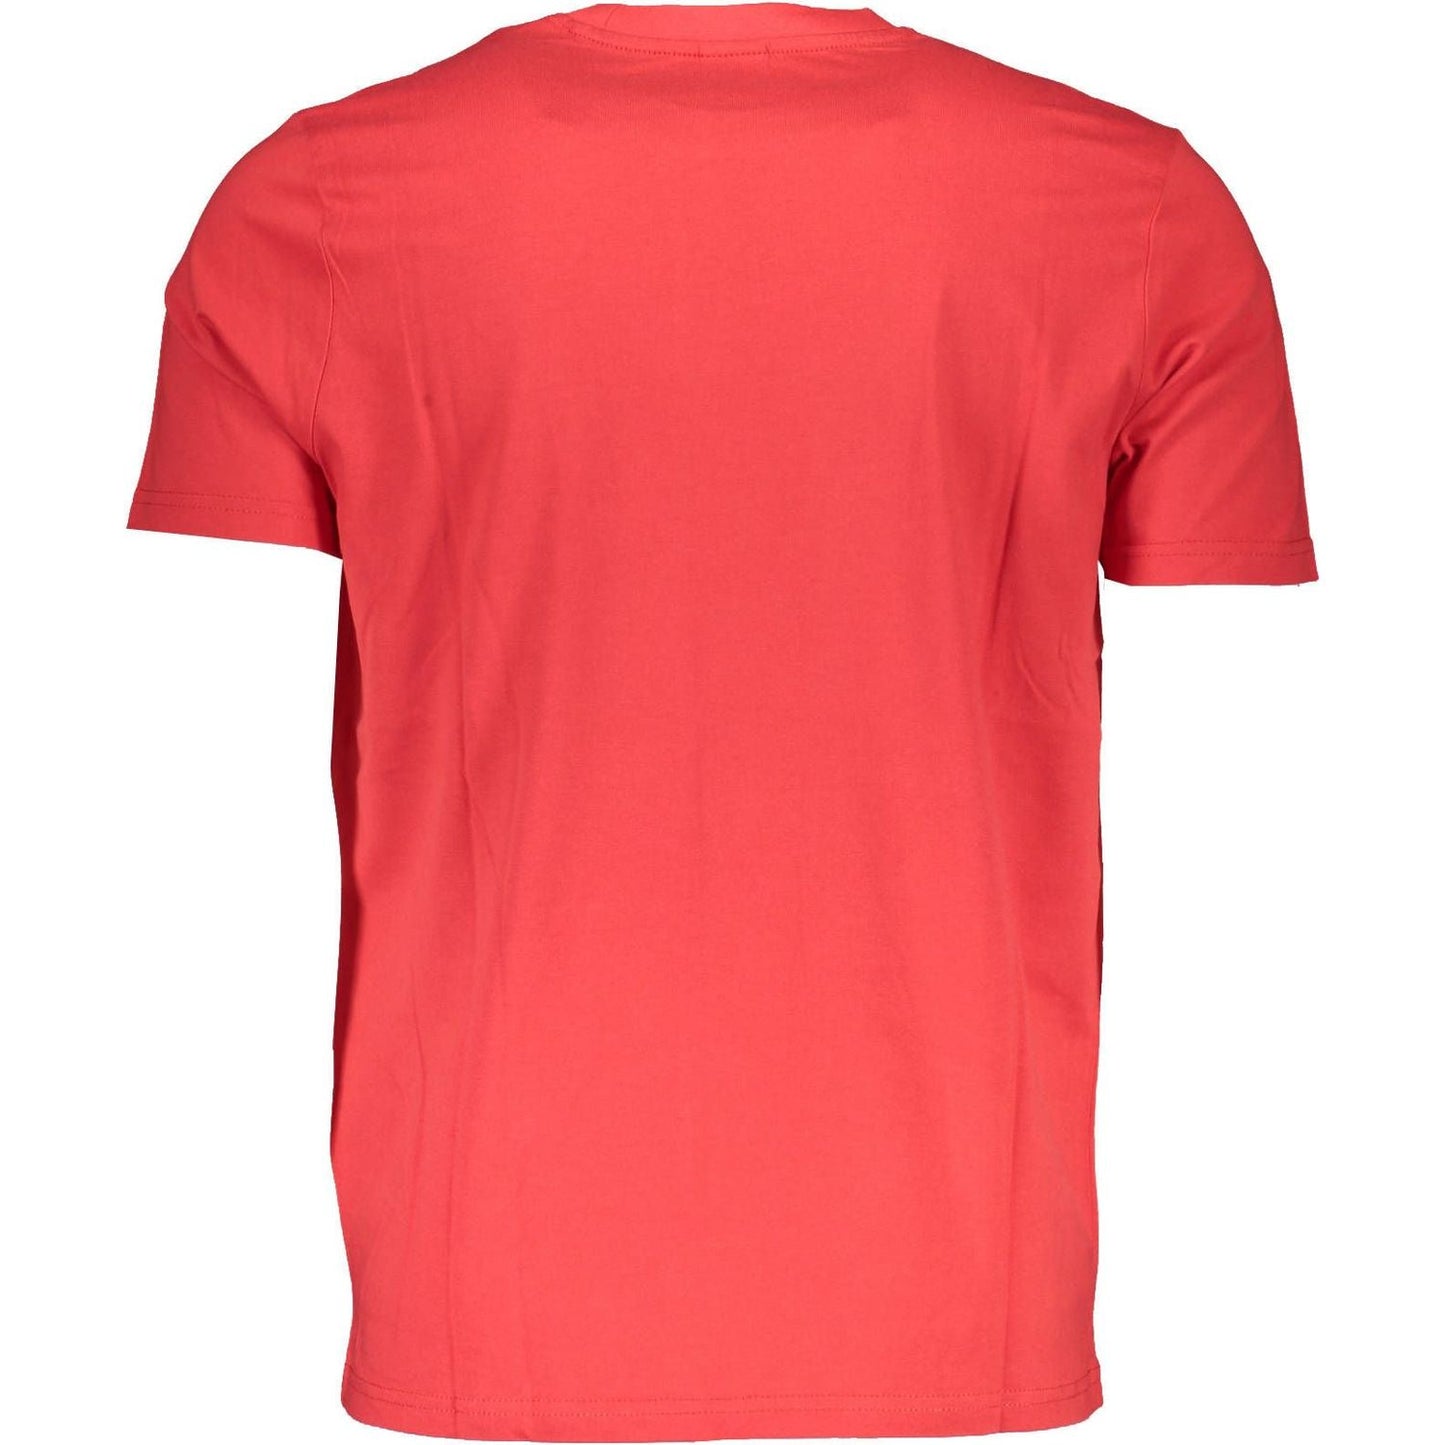 North Sails Vibrant Red Round Neck Tee with Logo Detail vibrant-red-round-neck-tee-with-logo-detail